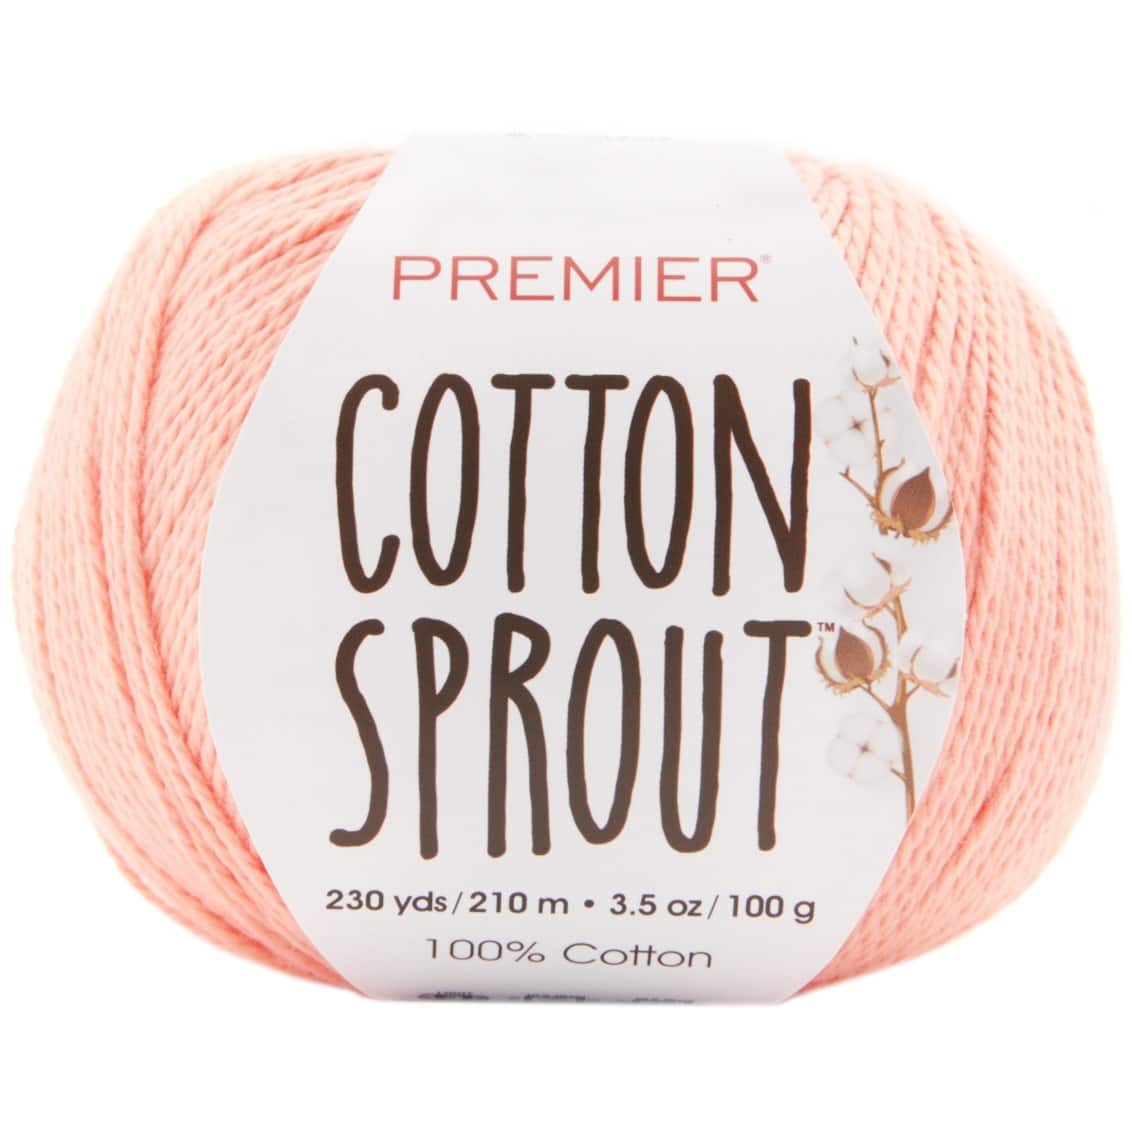 Premier Yarns Cotton Sprout DK, Natural Cotton Yarn, Machine-Washable, DK  Yarn for Crocheting and Knitting, Cranberry, 3.5 oz, 230 Yards